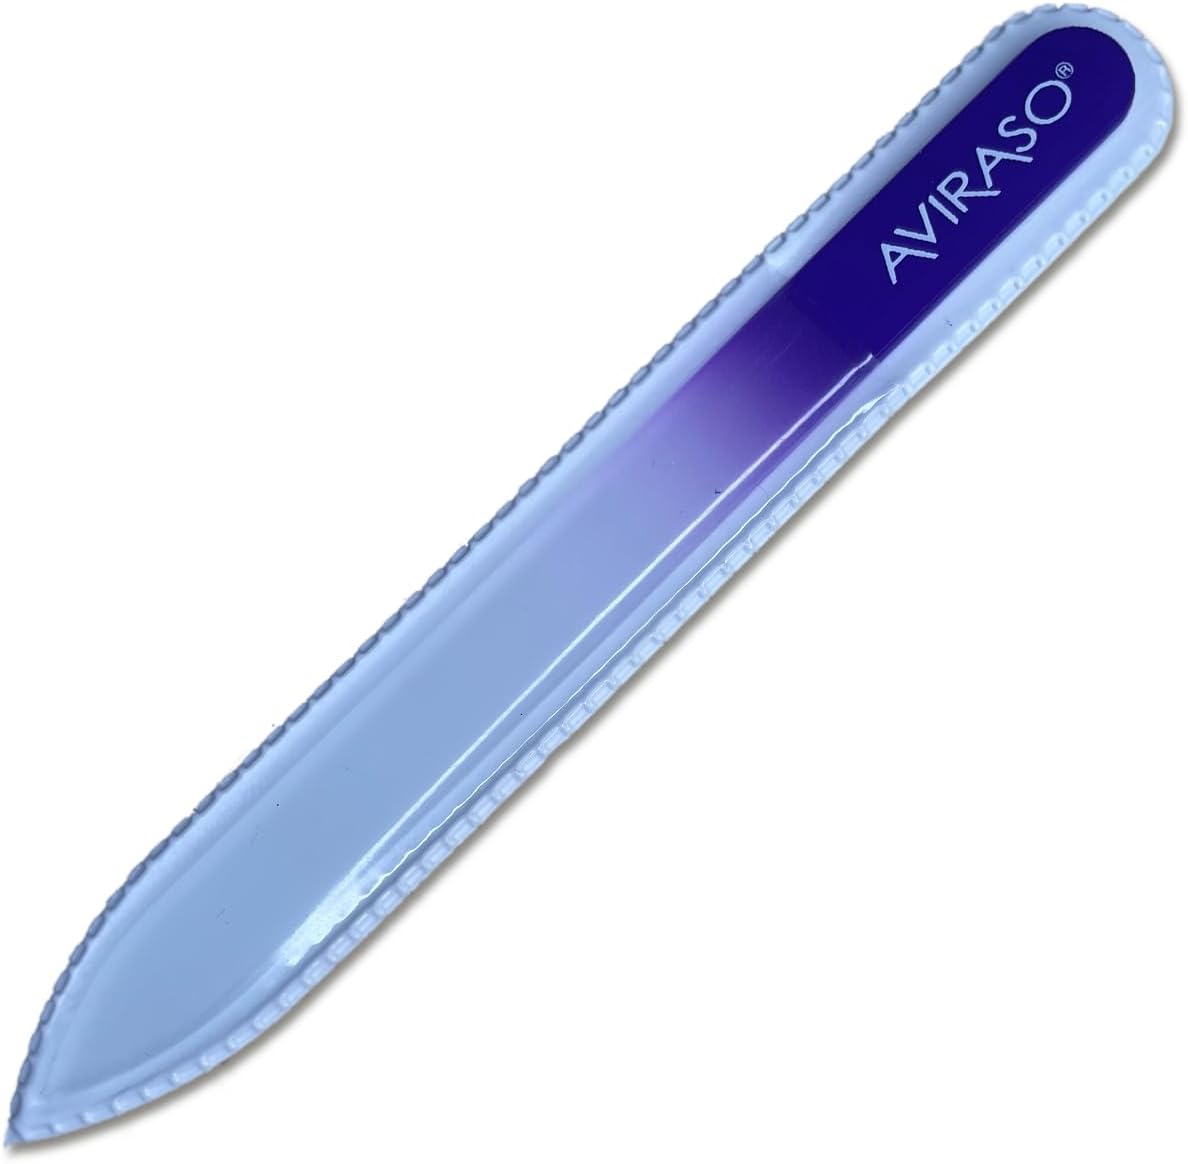 AVIRASO Original Premium Bohemia Crystal Glass Nail File on Both Sides with Protective Cover for All Nails - 14 cm - Manicure - Gentle Precision Files - Glass File Smooths and Protects Nails (Purple)